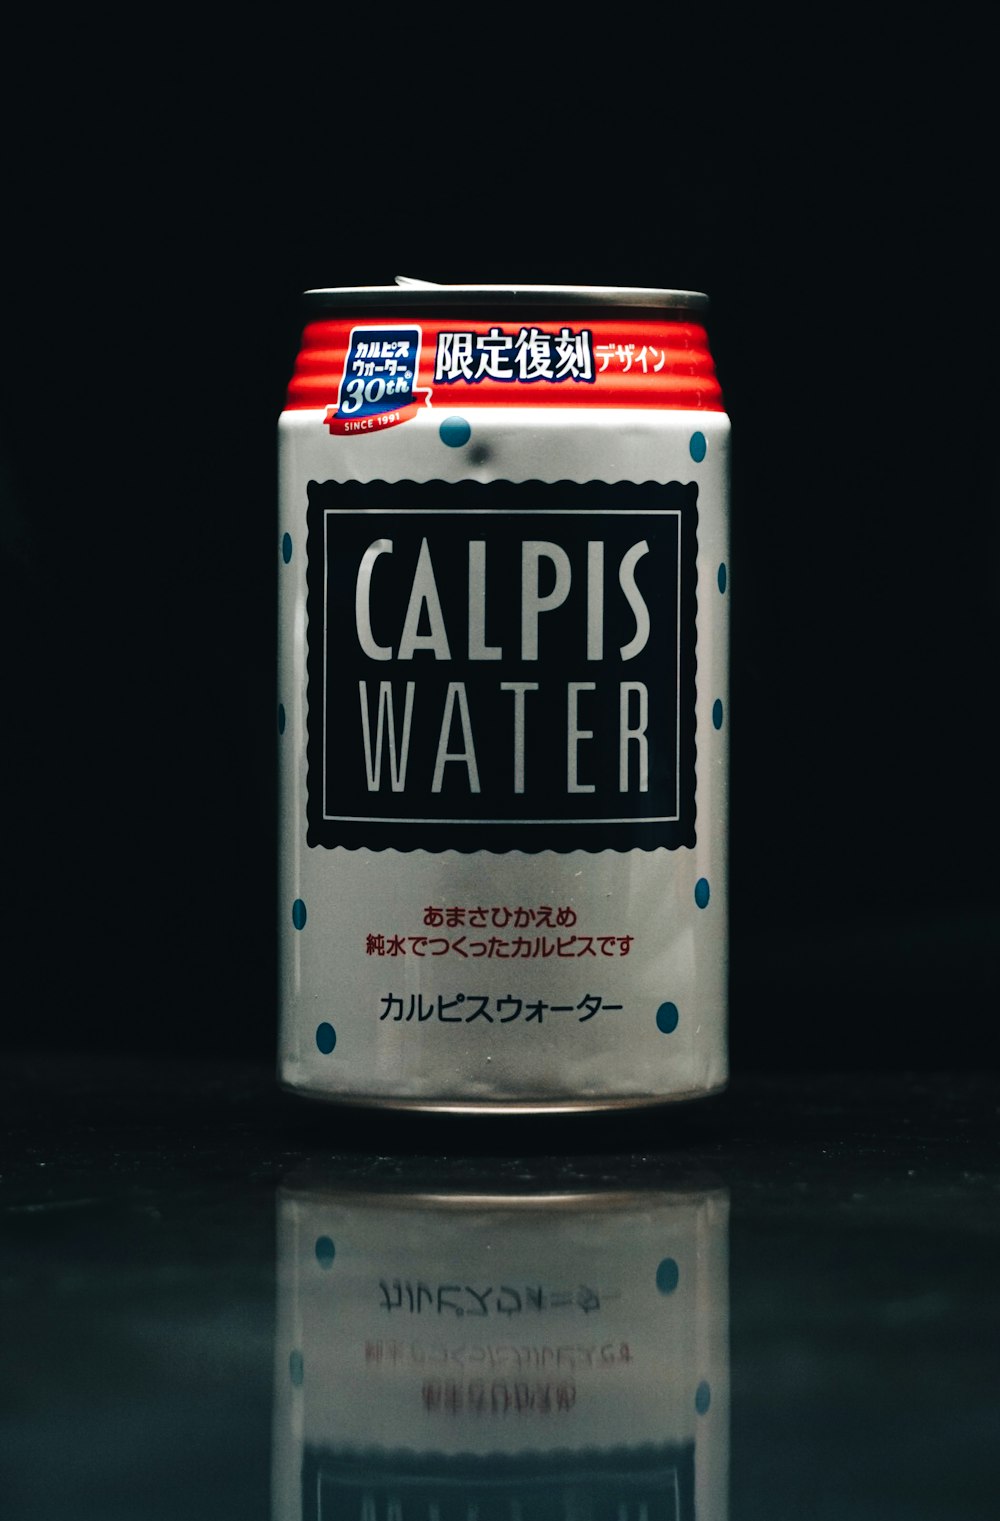 a can of calpis water on a reflective surface